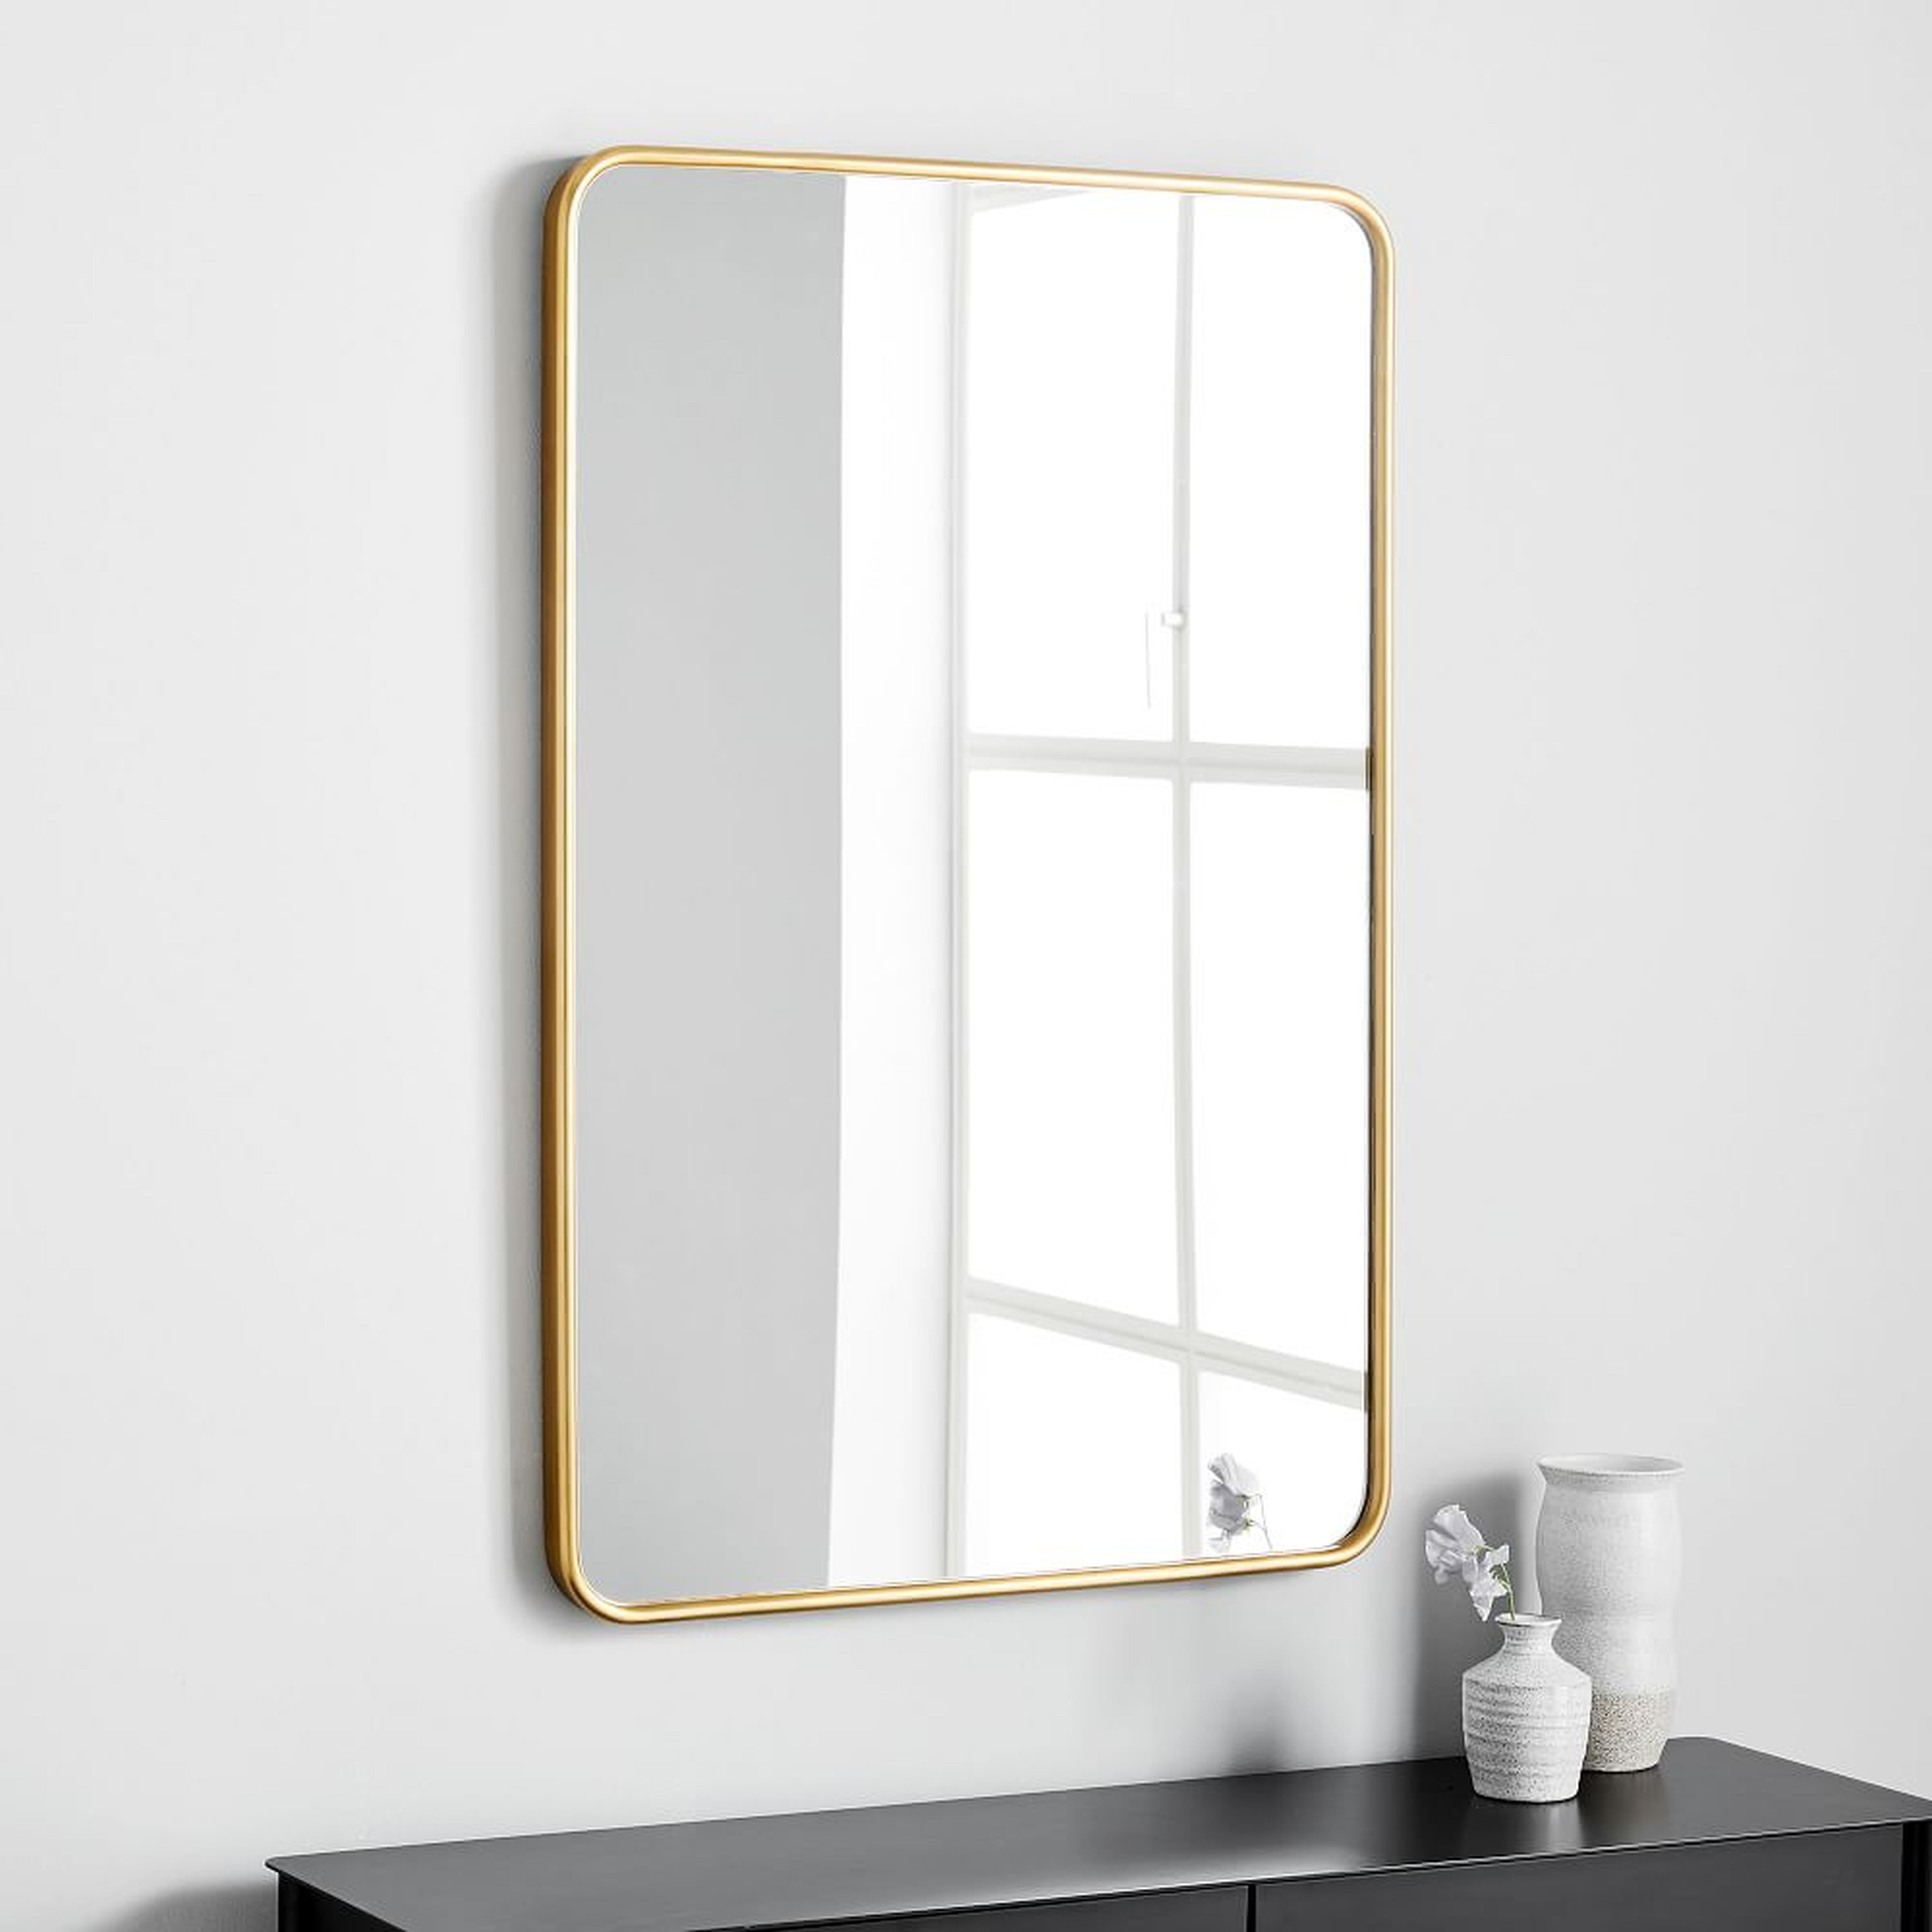 Streamline Rounded Edge Metal Wall Mirror, Antique Brass, 24"Wx36"H - West Elm